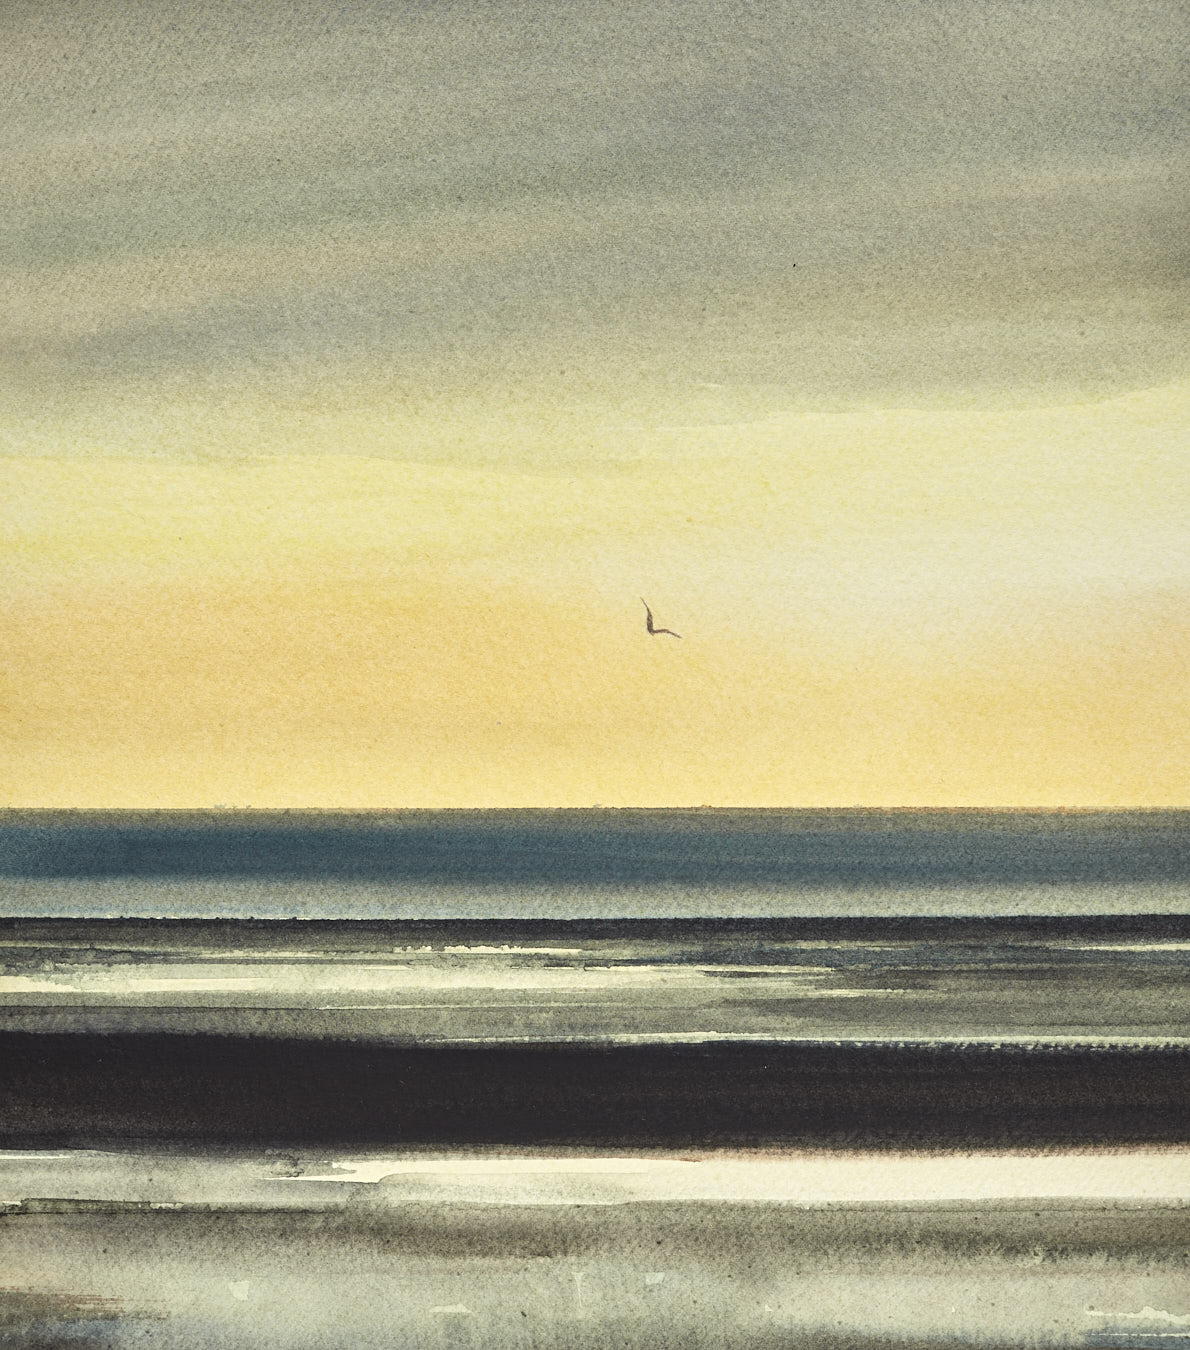 Large image of Sunset over the tide original watercolour painting by Timothy Gent